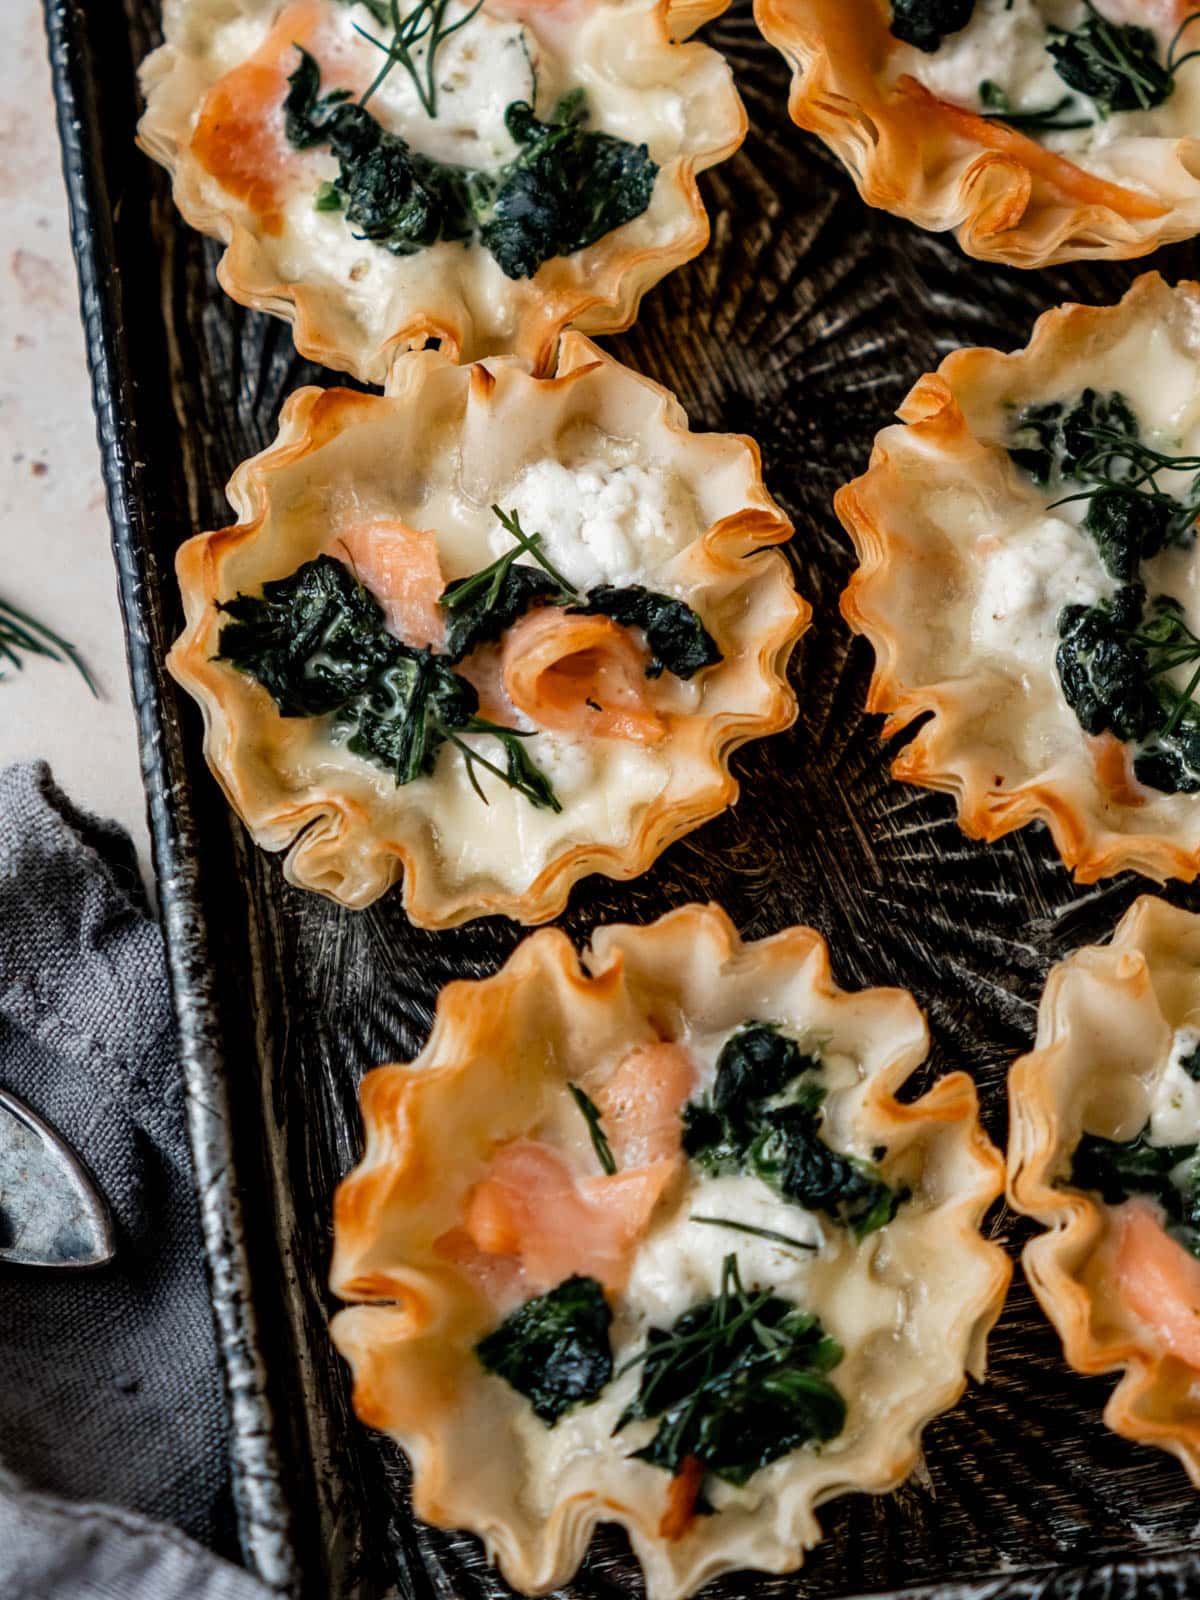 Smoked salmon, goat cheese and spinach baked in phyllo cup.